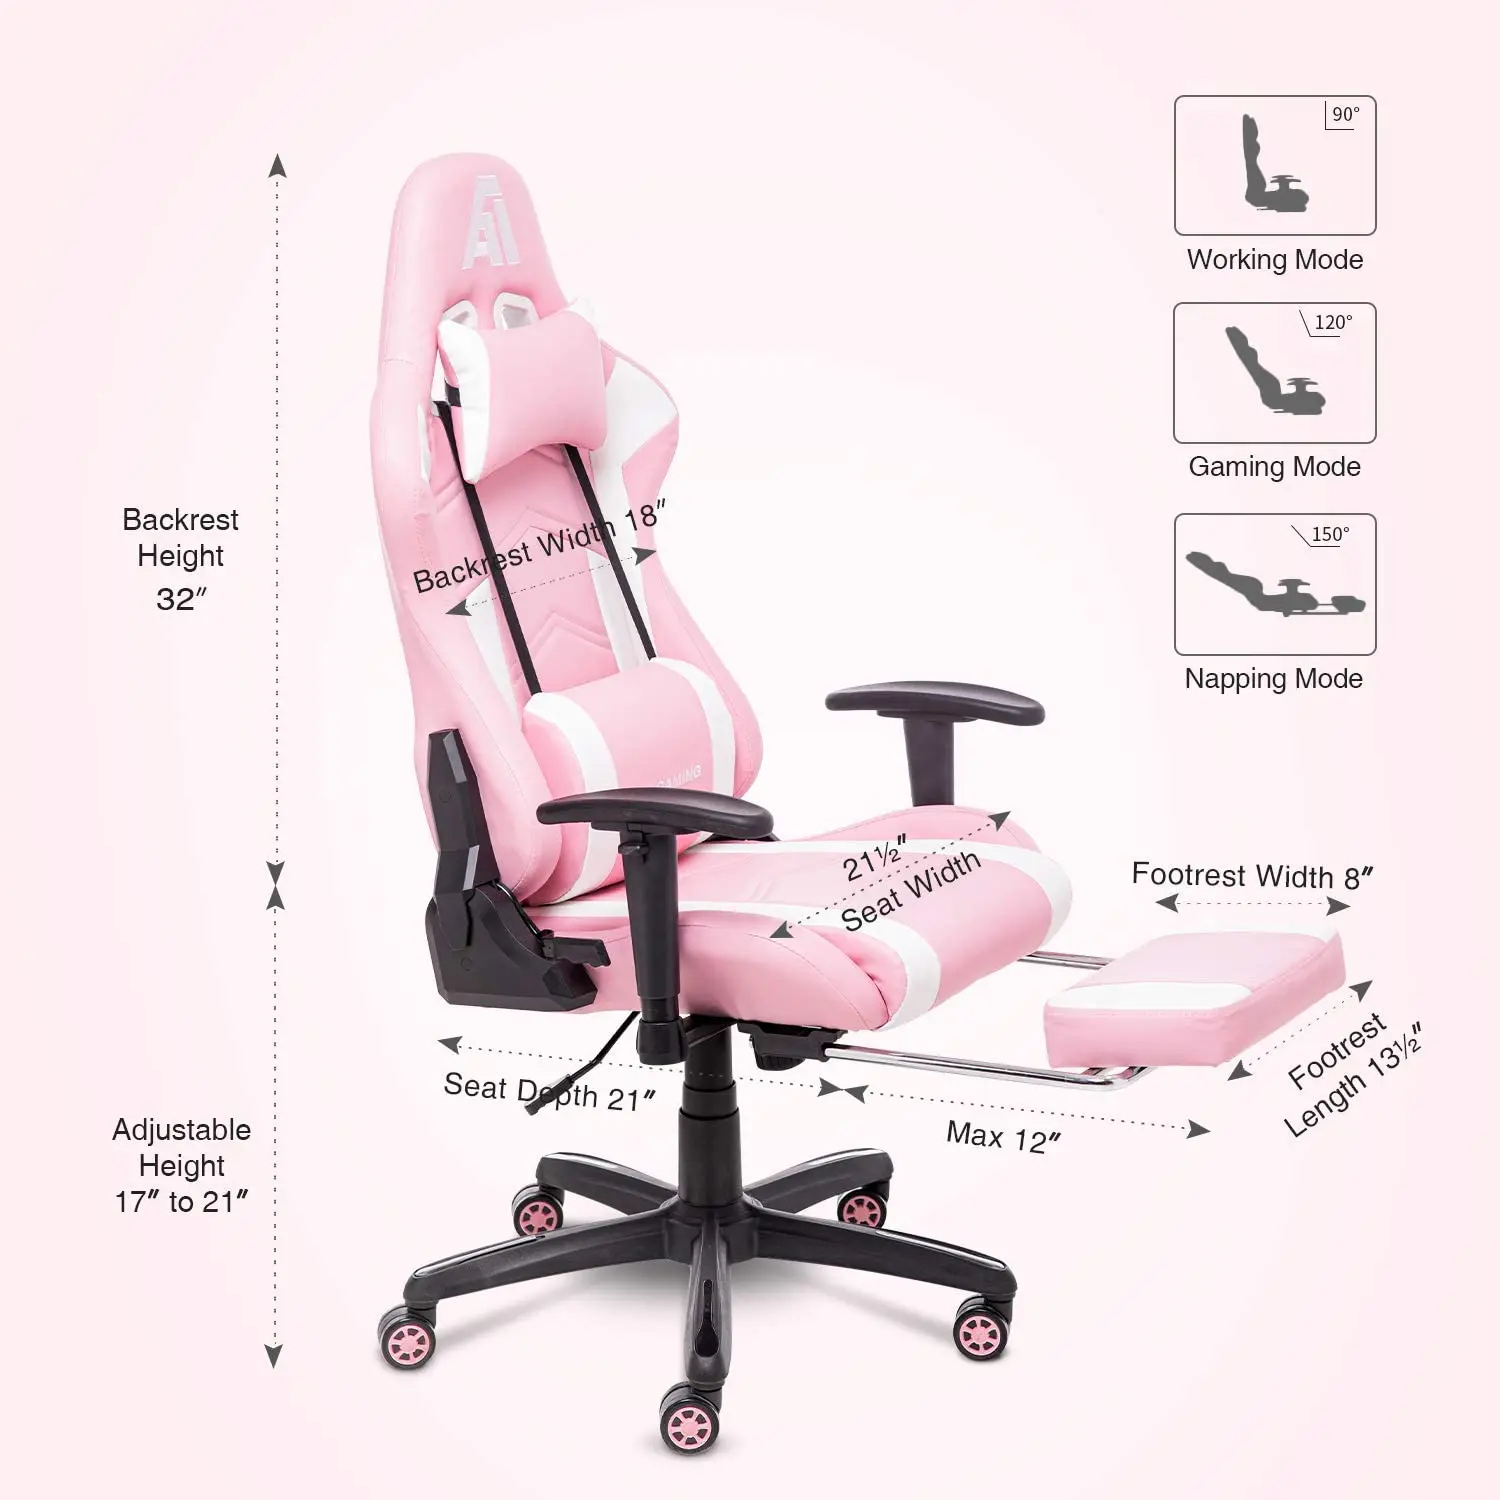 Wholesale Custom Modern Office Home Leather Mesh Led Massage Scorpion Racing Rgb Rocker Gaming Chair Black Pink White Buy Gaming Chair Racing Modern Gaming Chair Mesh Gaming Chair Gaming Chair Leather